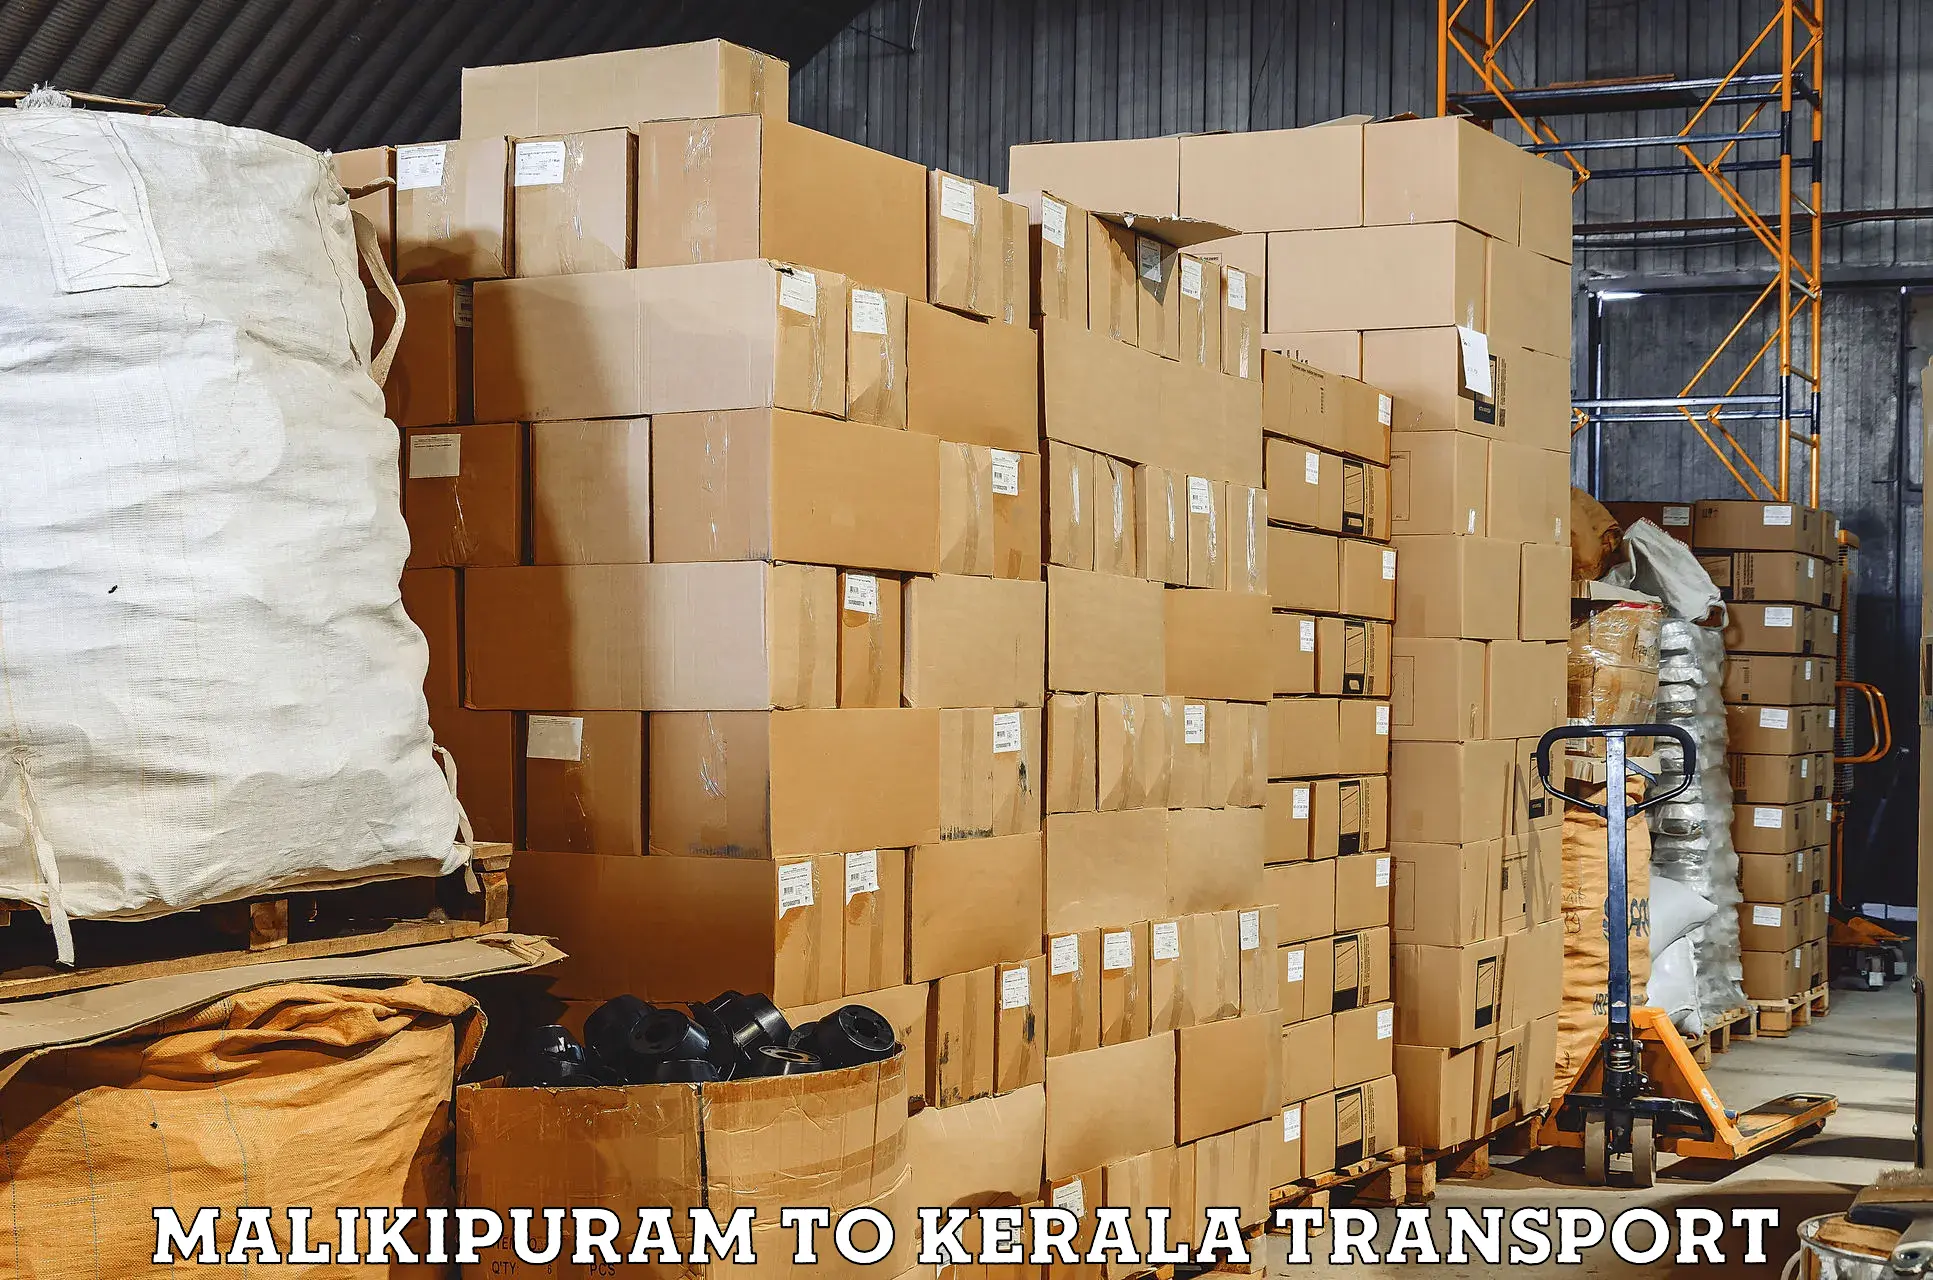 Transport bike from one state to another Malikipuram to Kannur